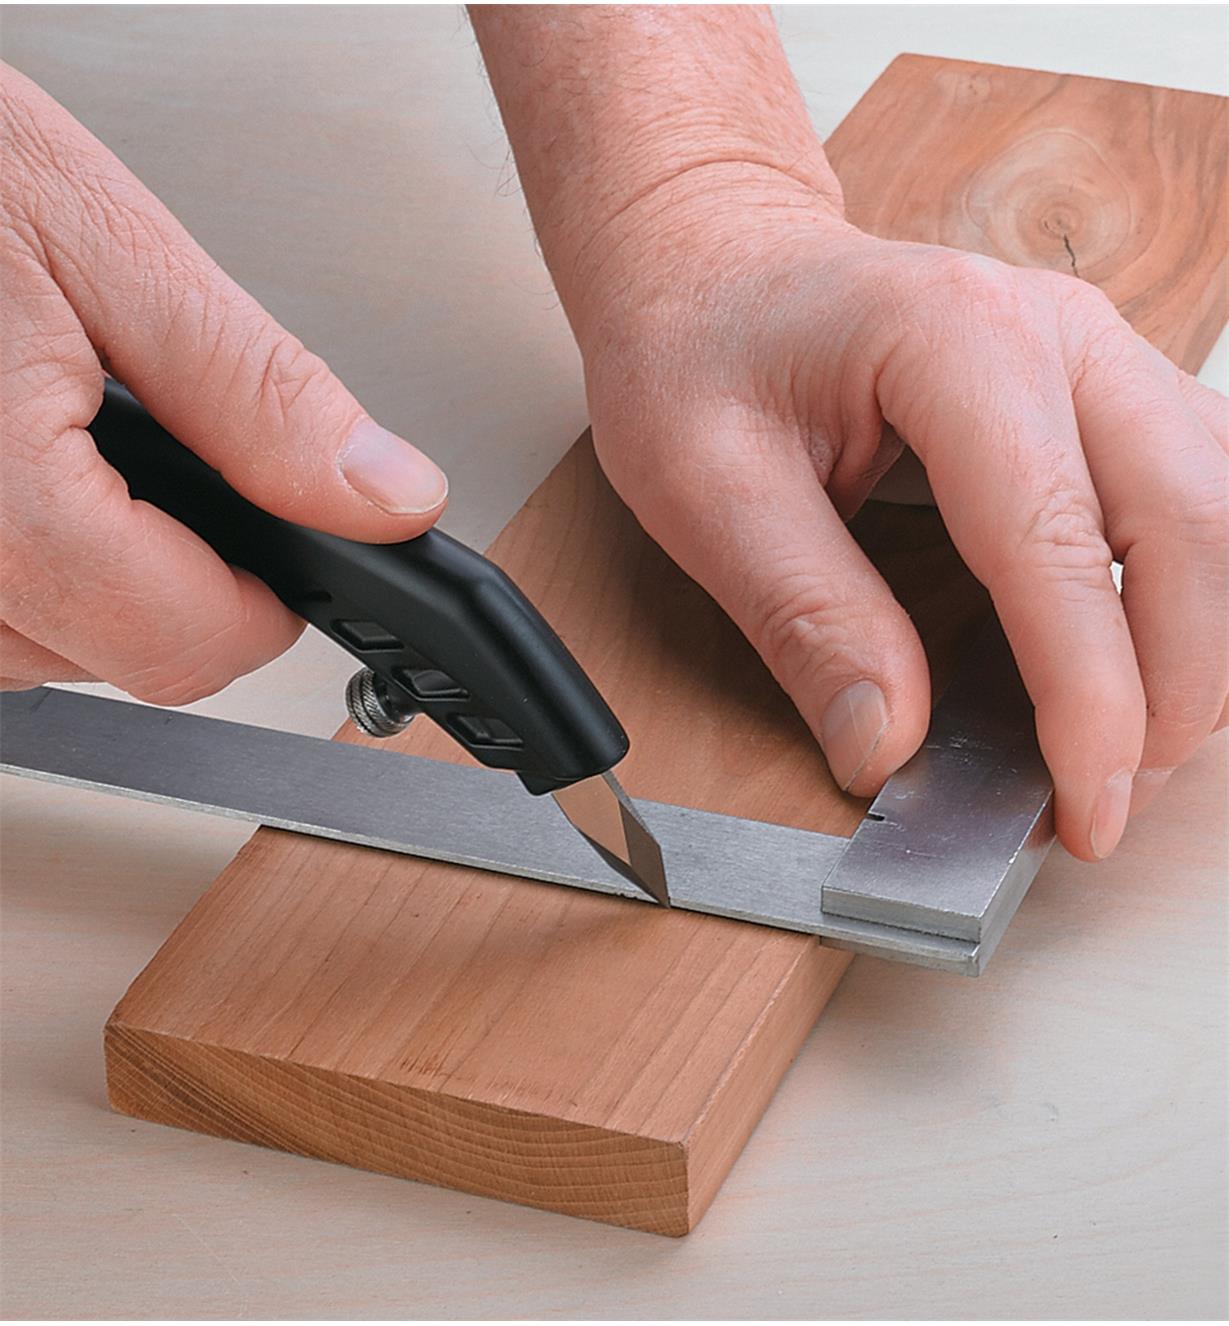 Marking a board with a shop knife using a pistol grip